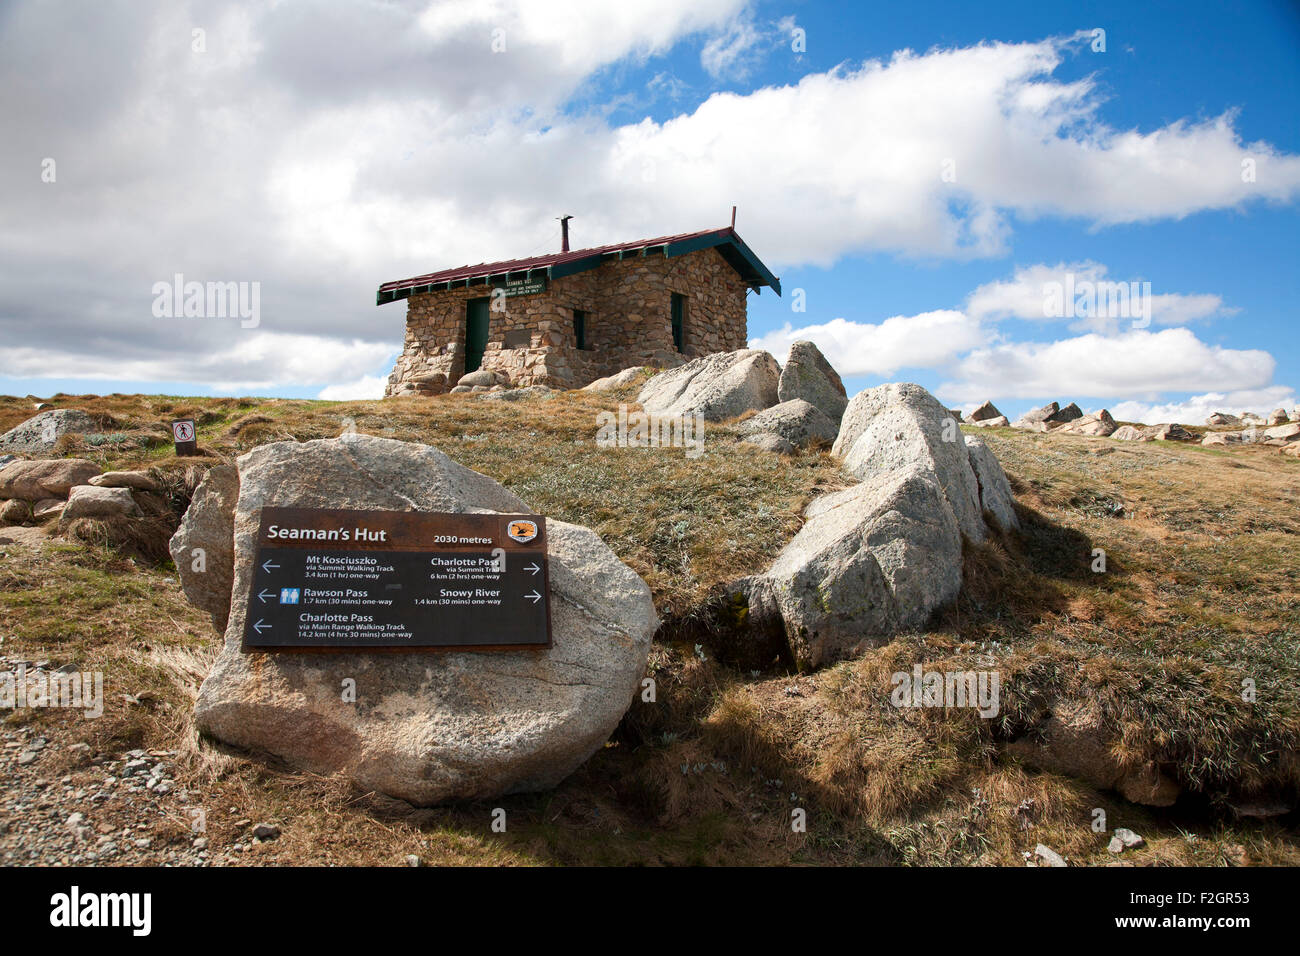 Seaman's Hut is an alpine hut and memorial located in Kosciuszko National Park New South Wales, Australia. Stock Photo